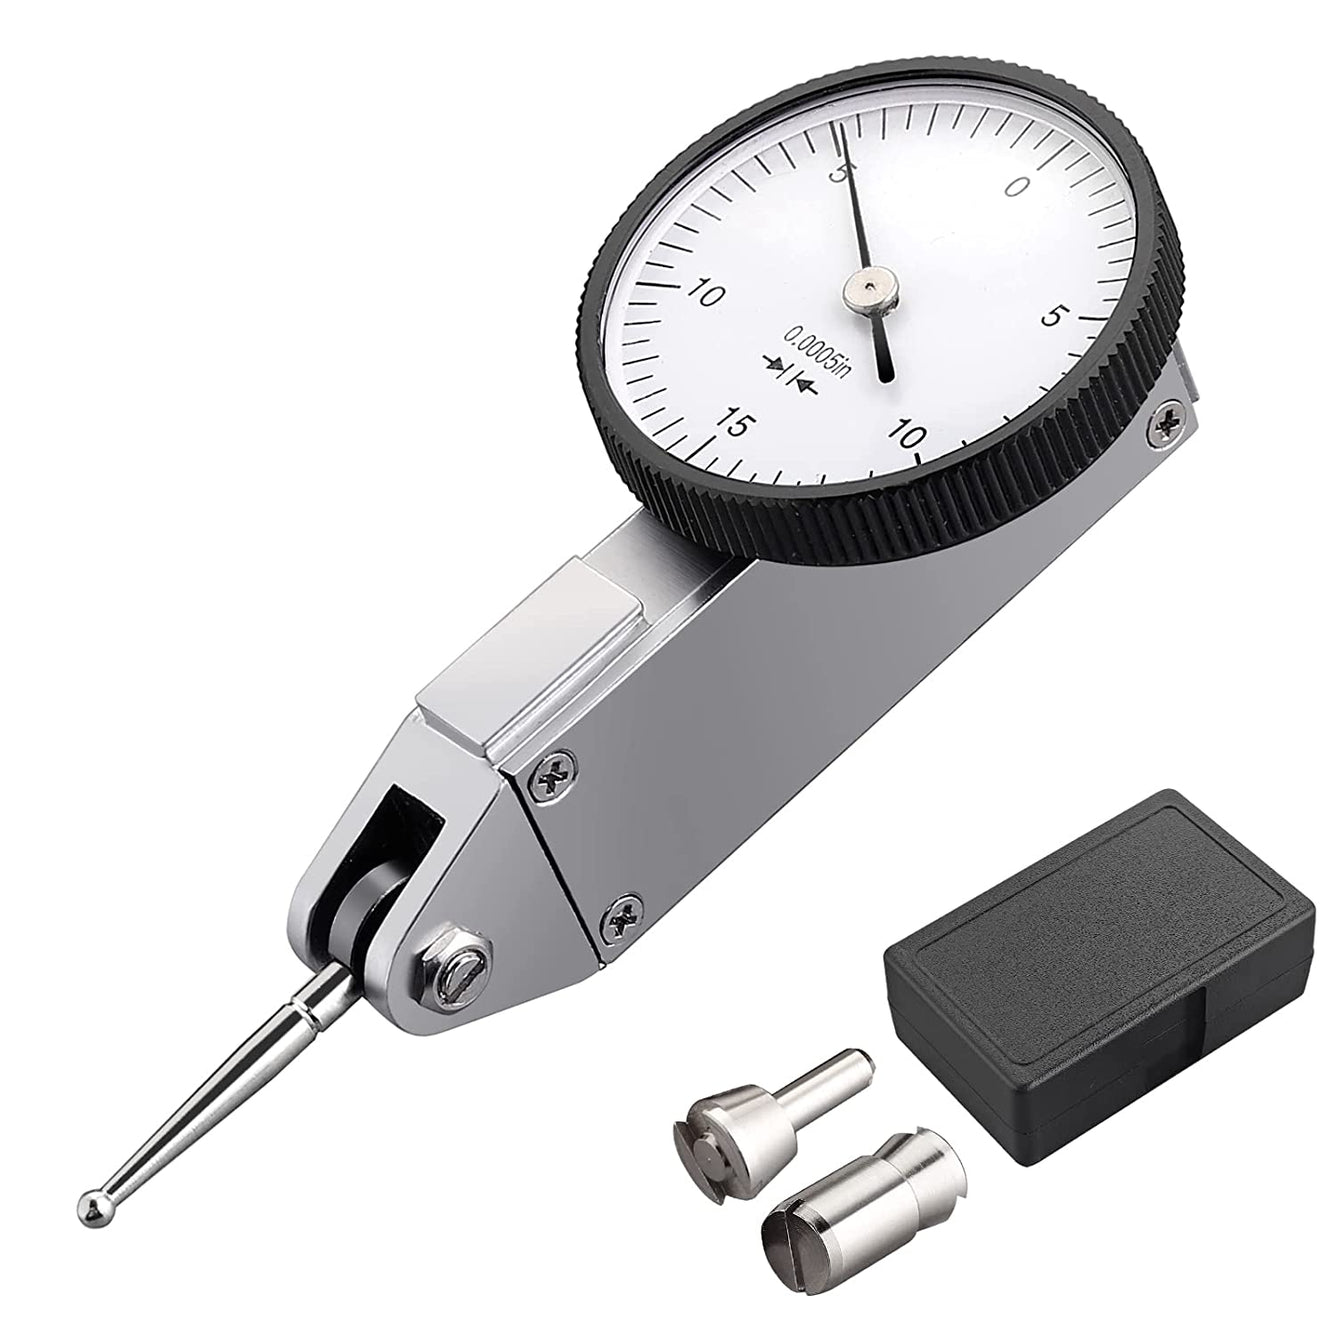 Neoteck Dial Test Indicator with Storage Case